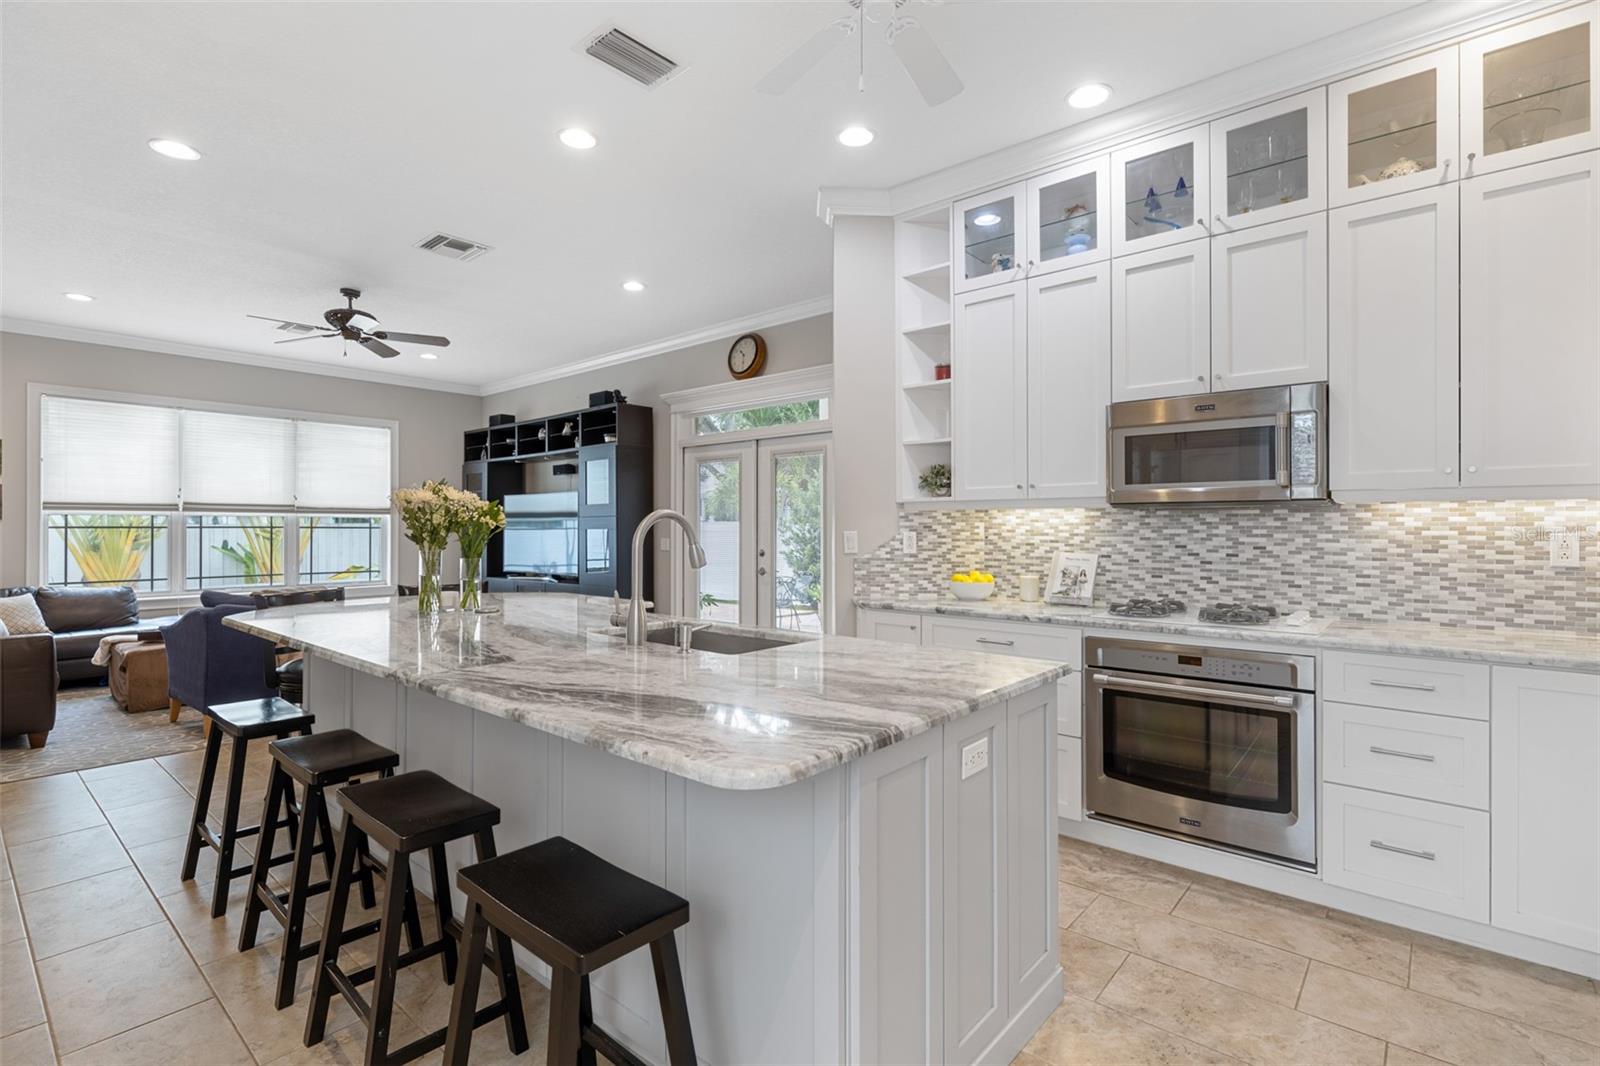 Gourmet kitchen with Stainless Steal applicances and stunning Granite countertops.